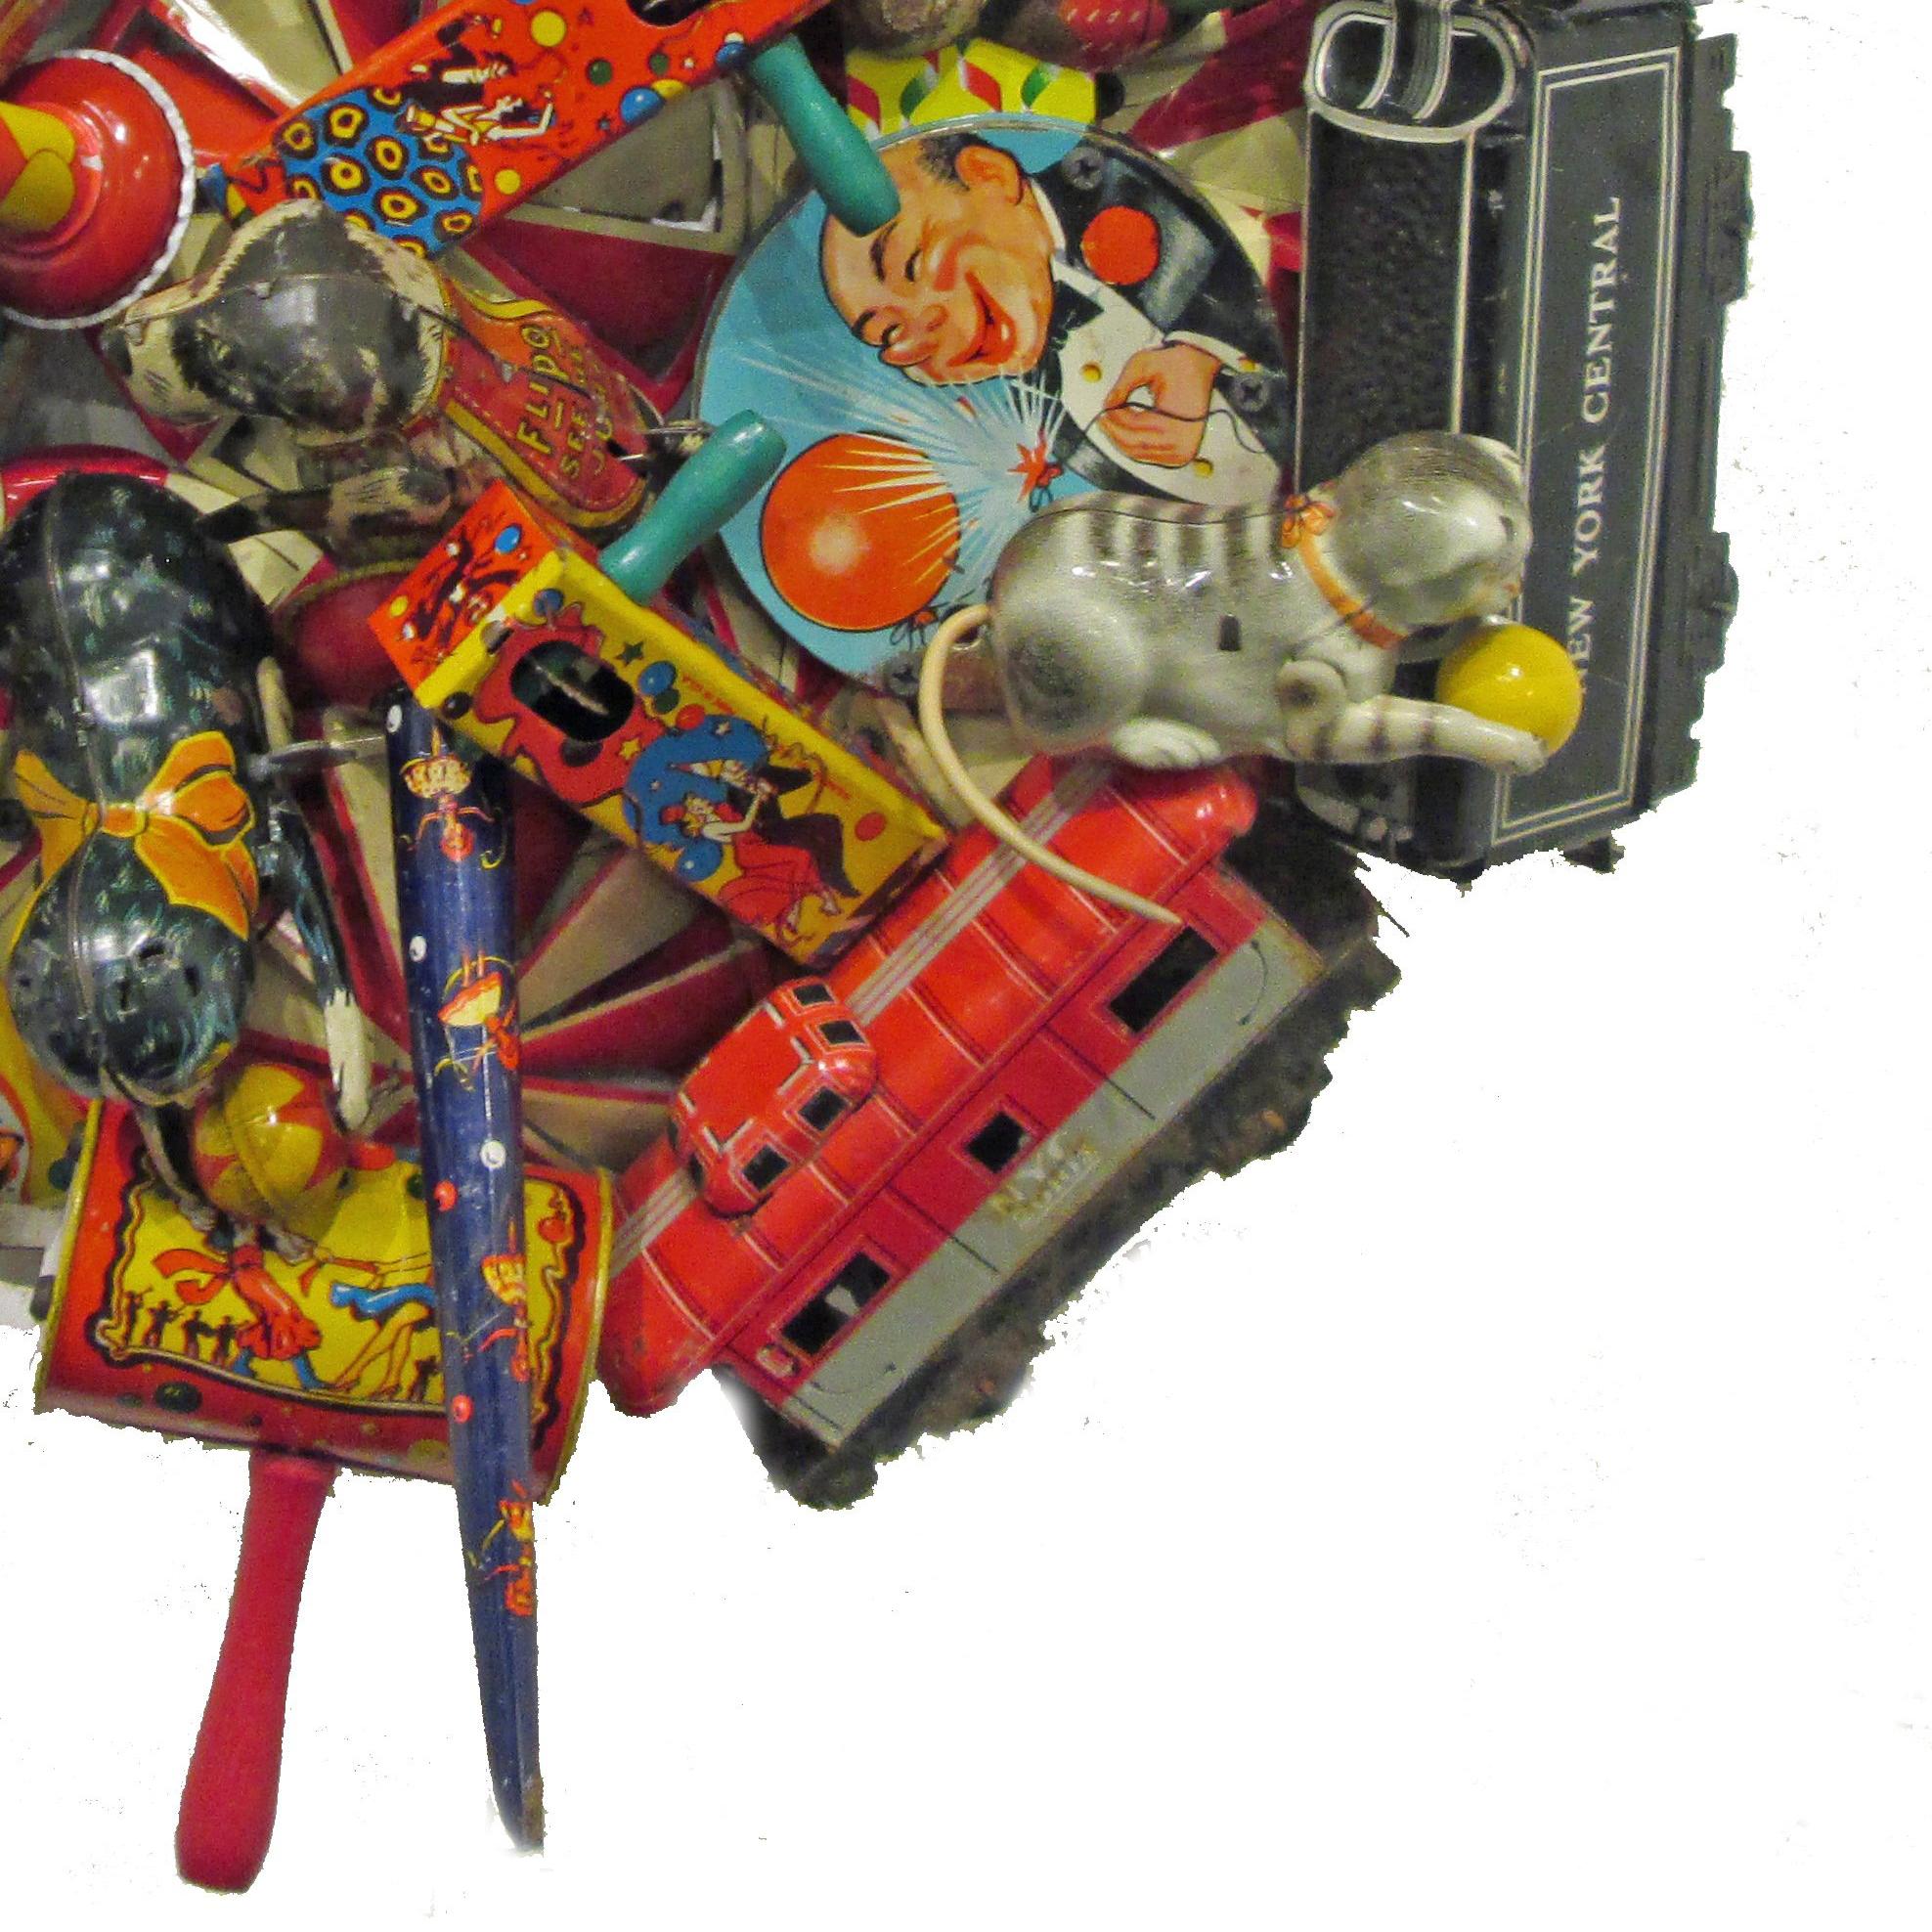 American vintage  assemblage,  composed of vintage metal toys , 
planes ,train cars, caboose, telephones  . Signed by the artist.